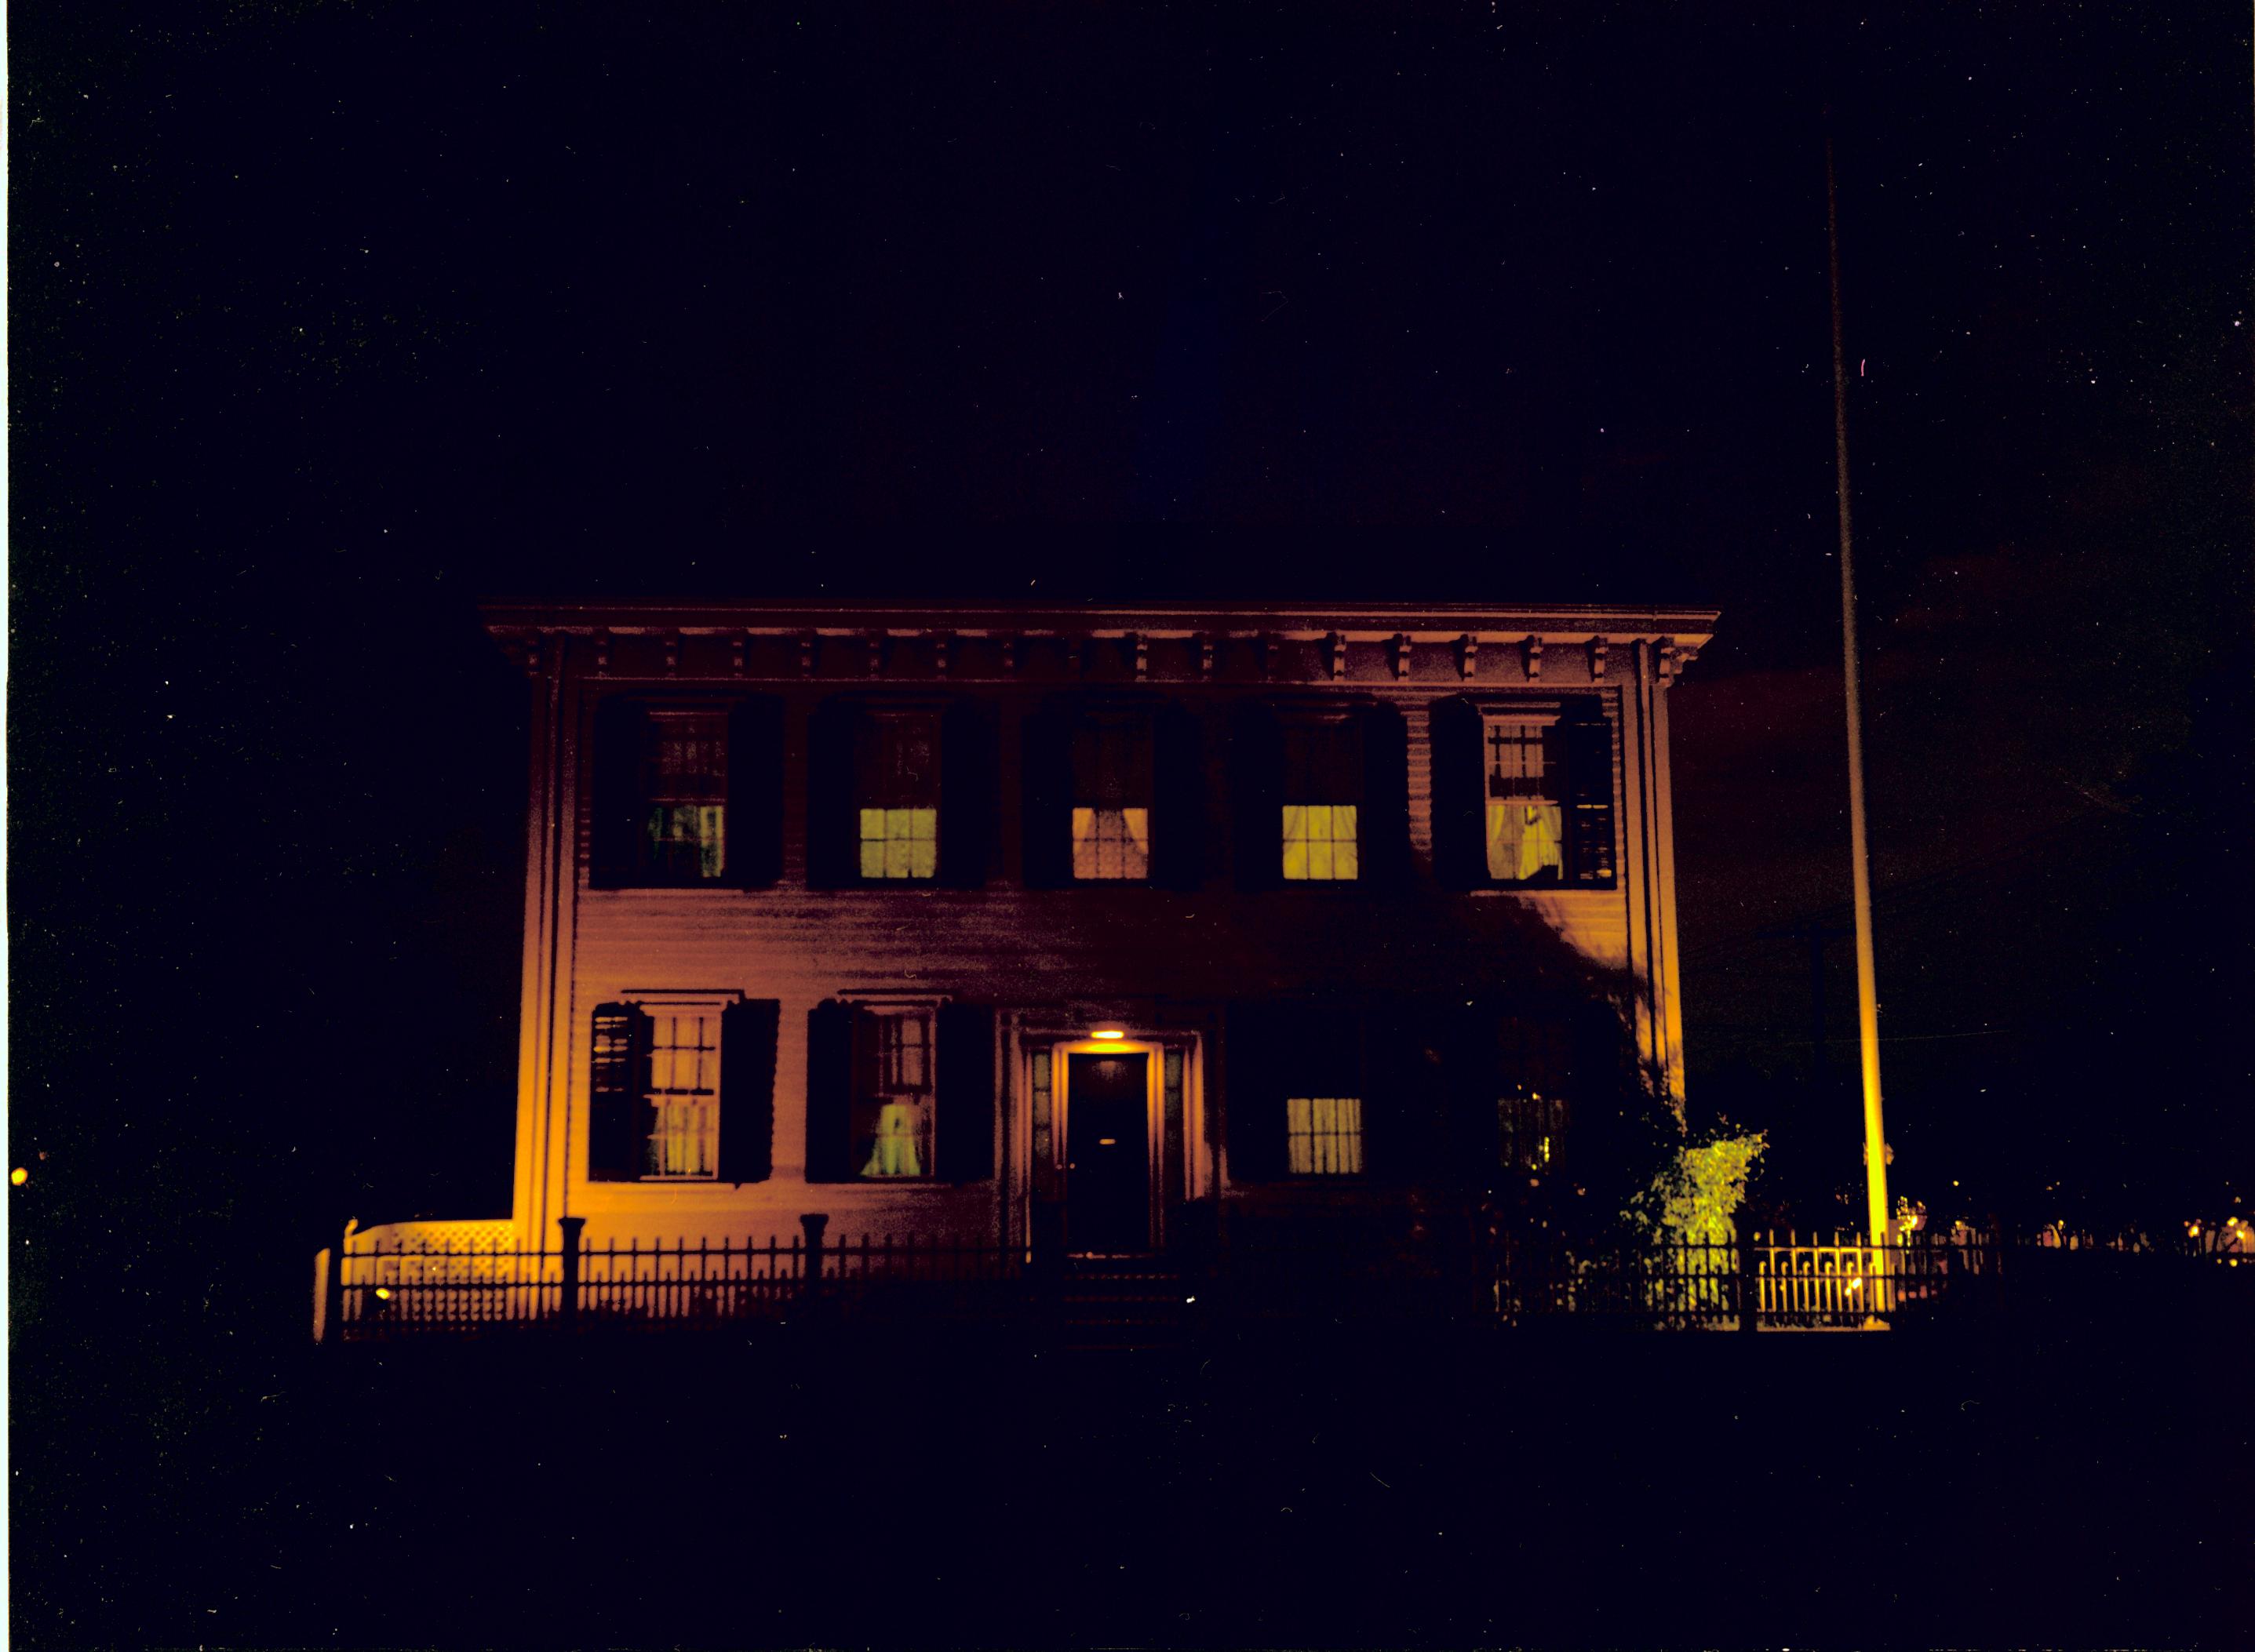 Lincoln Home west (front) elevation at night. Lighted flagpole on corner behind picket fence on right. Lights on inside house. Looking East from 8th Street Lincoln Home, night, 8th Street, flagpole